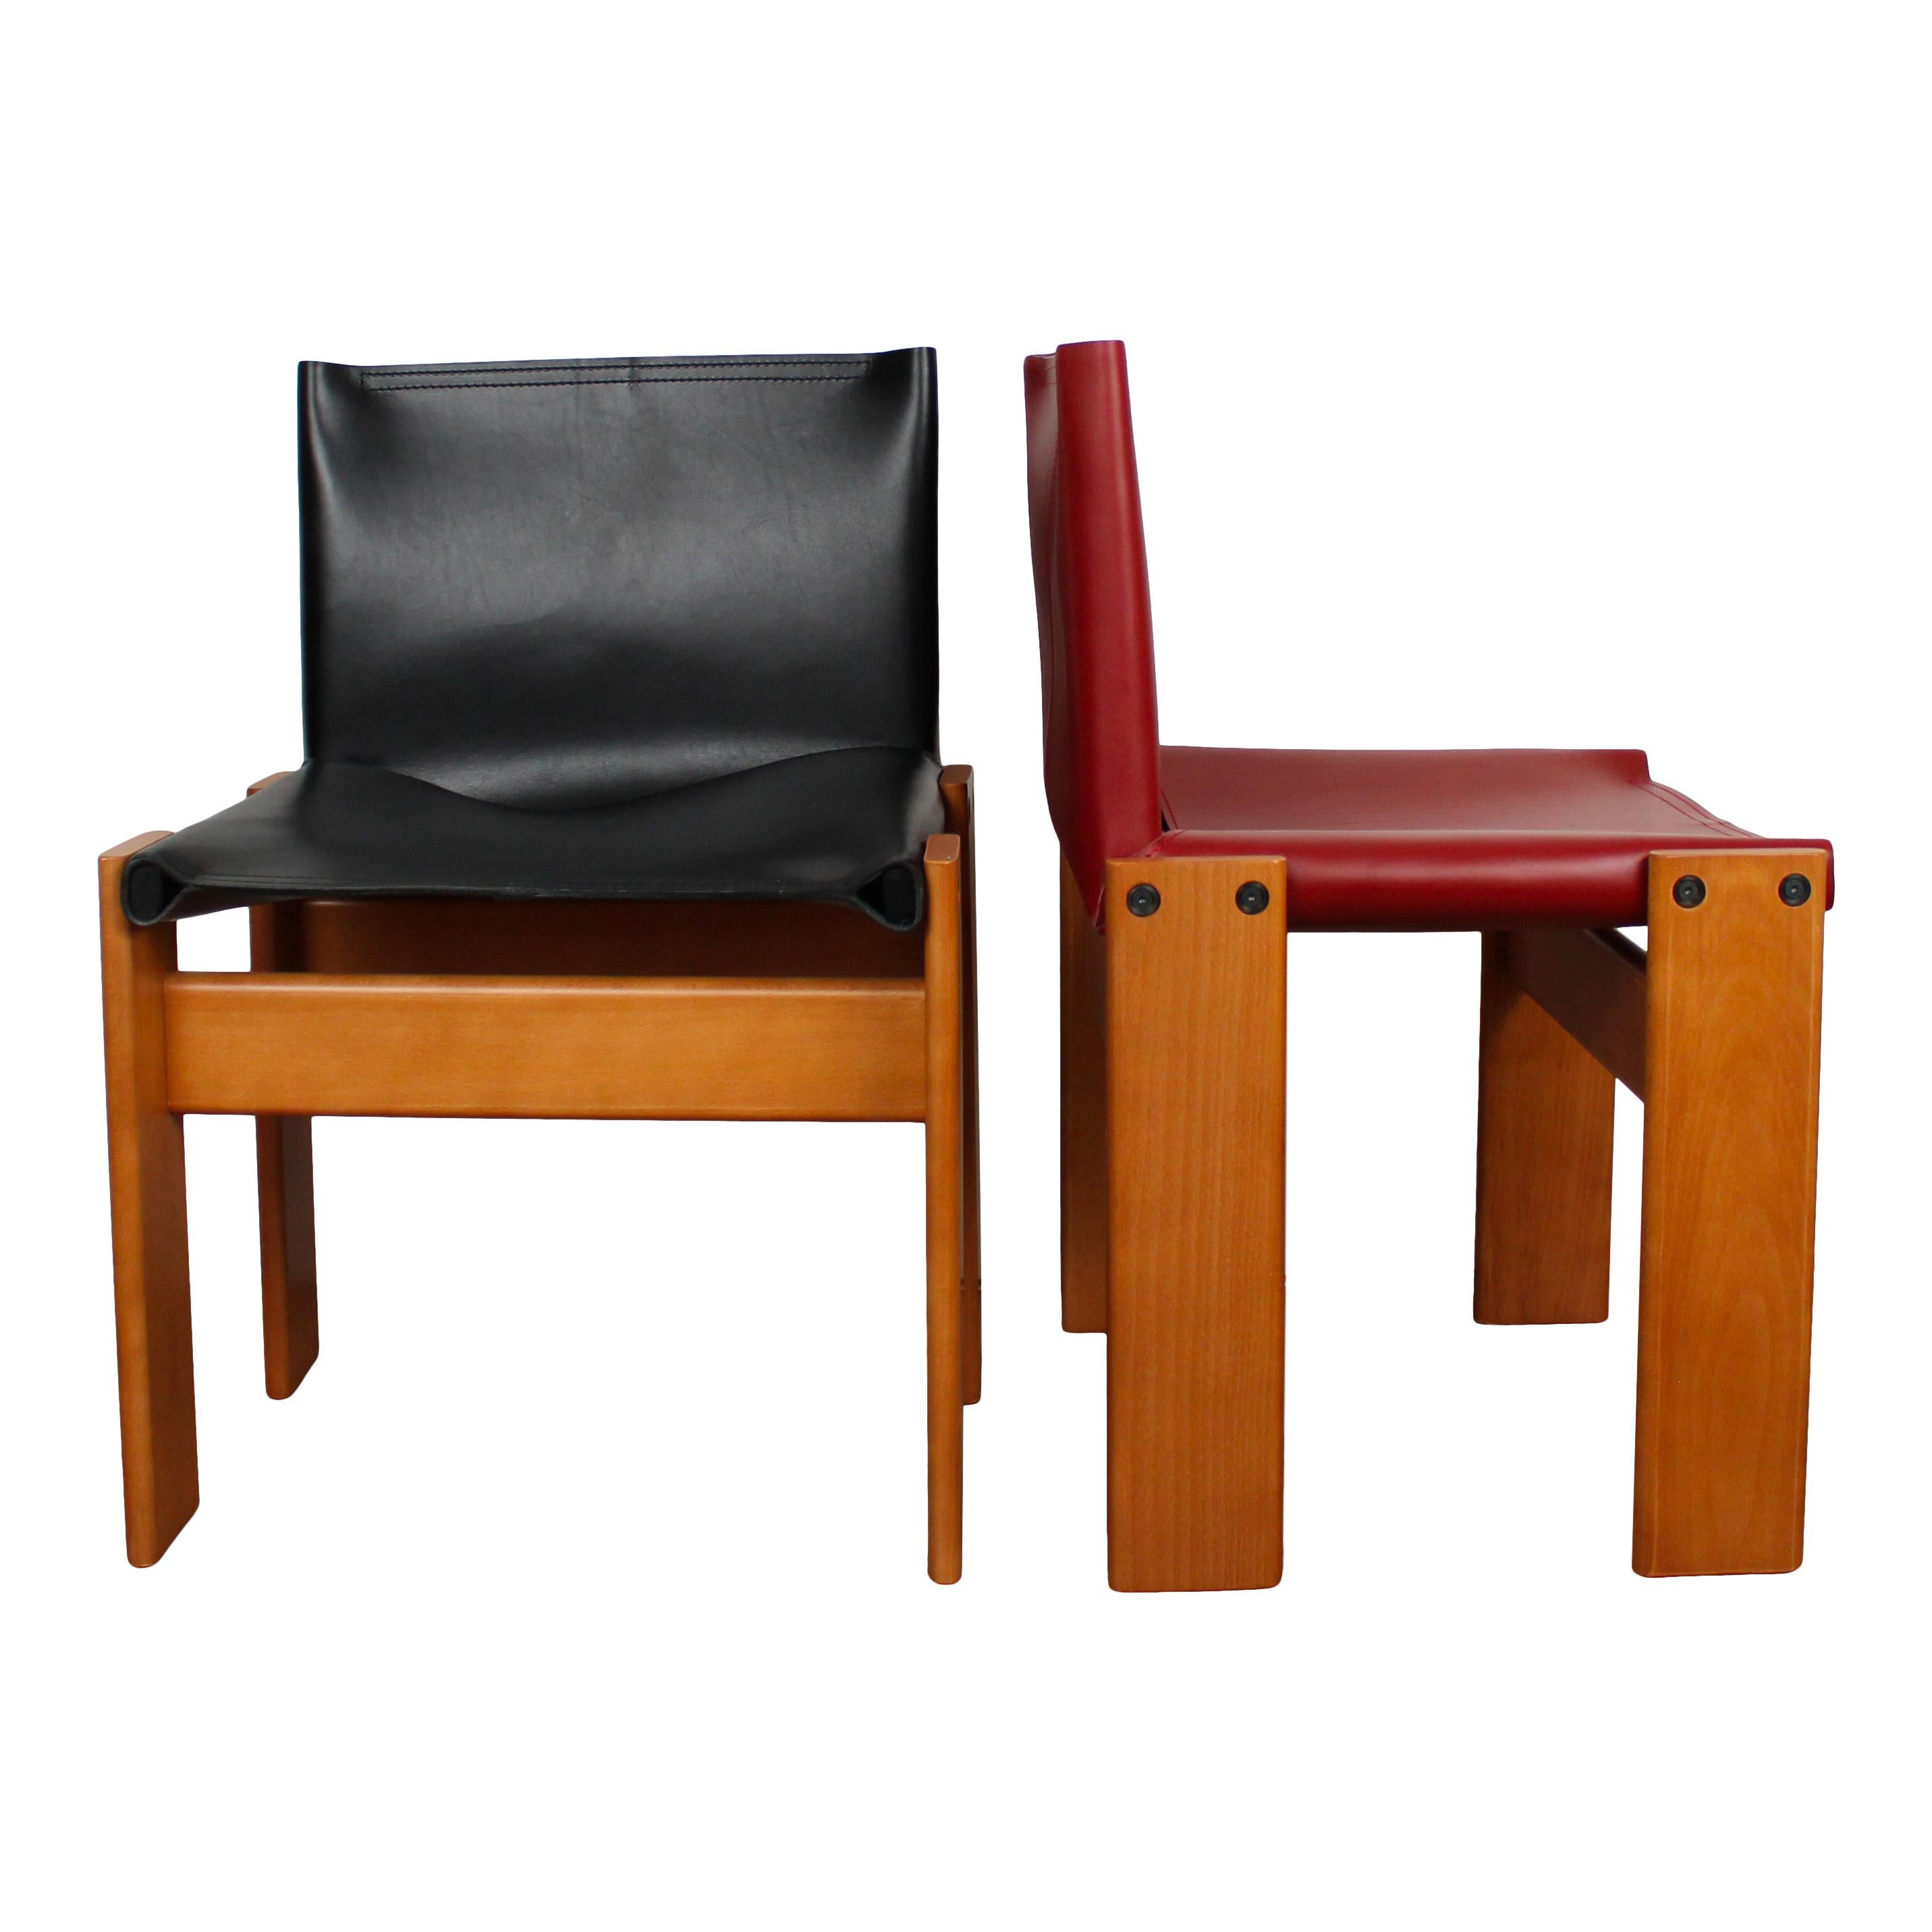 Afra & Tobia Scarpa Black & Red Leather Monk Dining Chair for Molteni, Set of 6 In Good Condition For Sale In Vicenza, IT